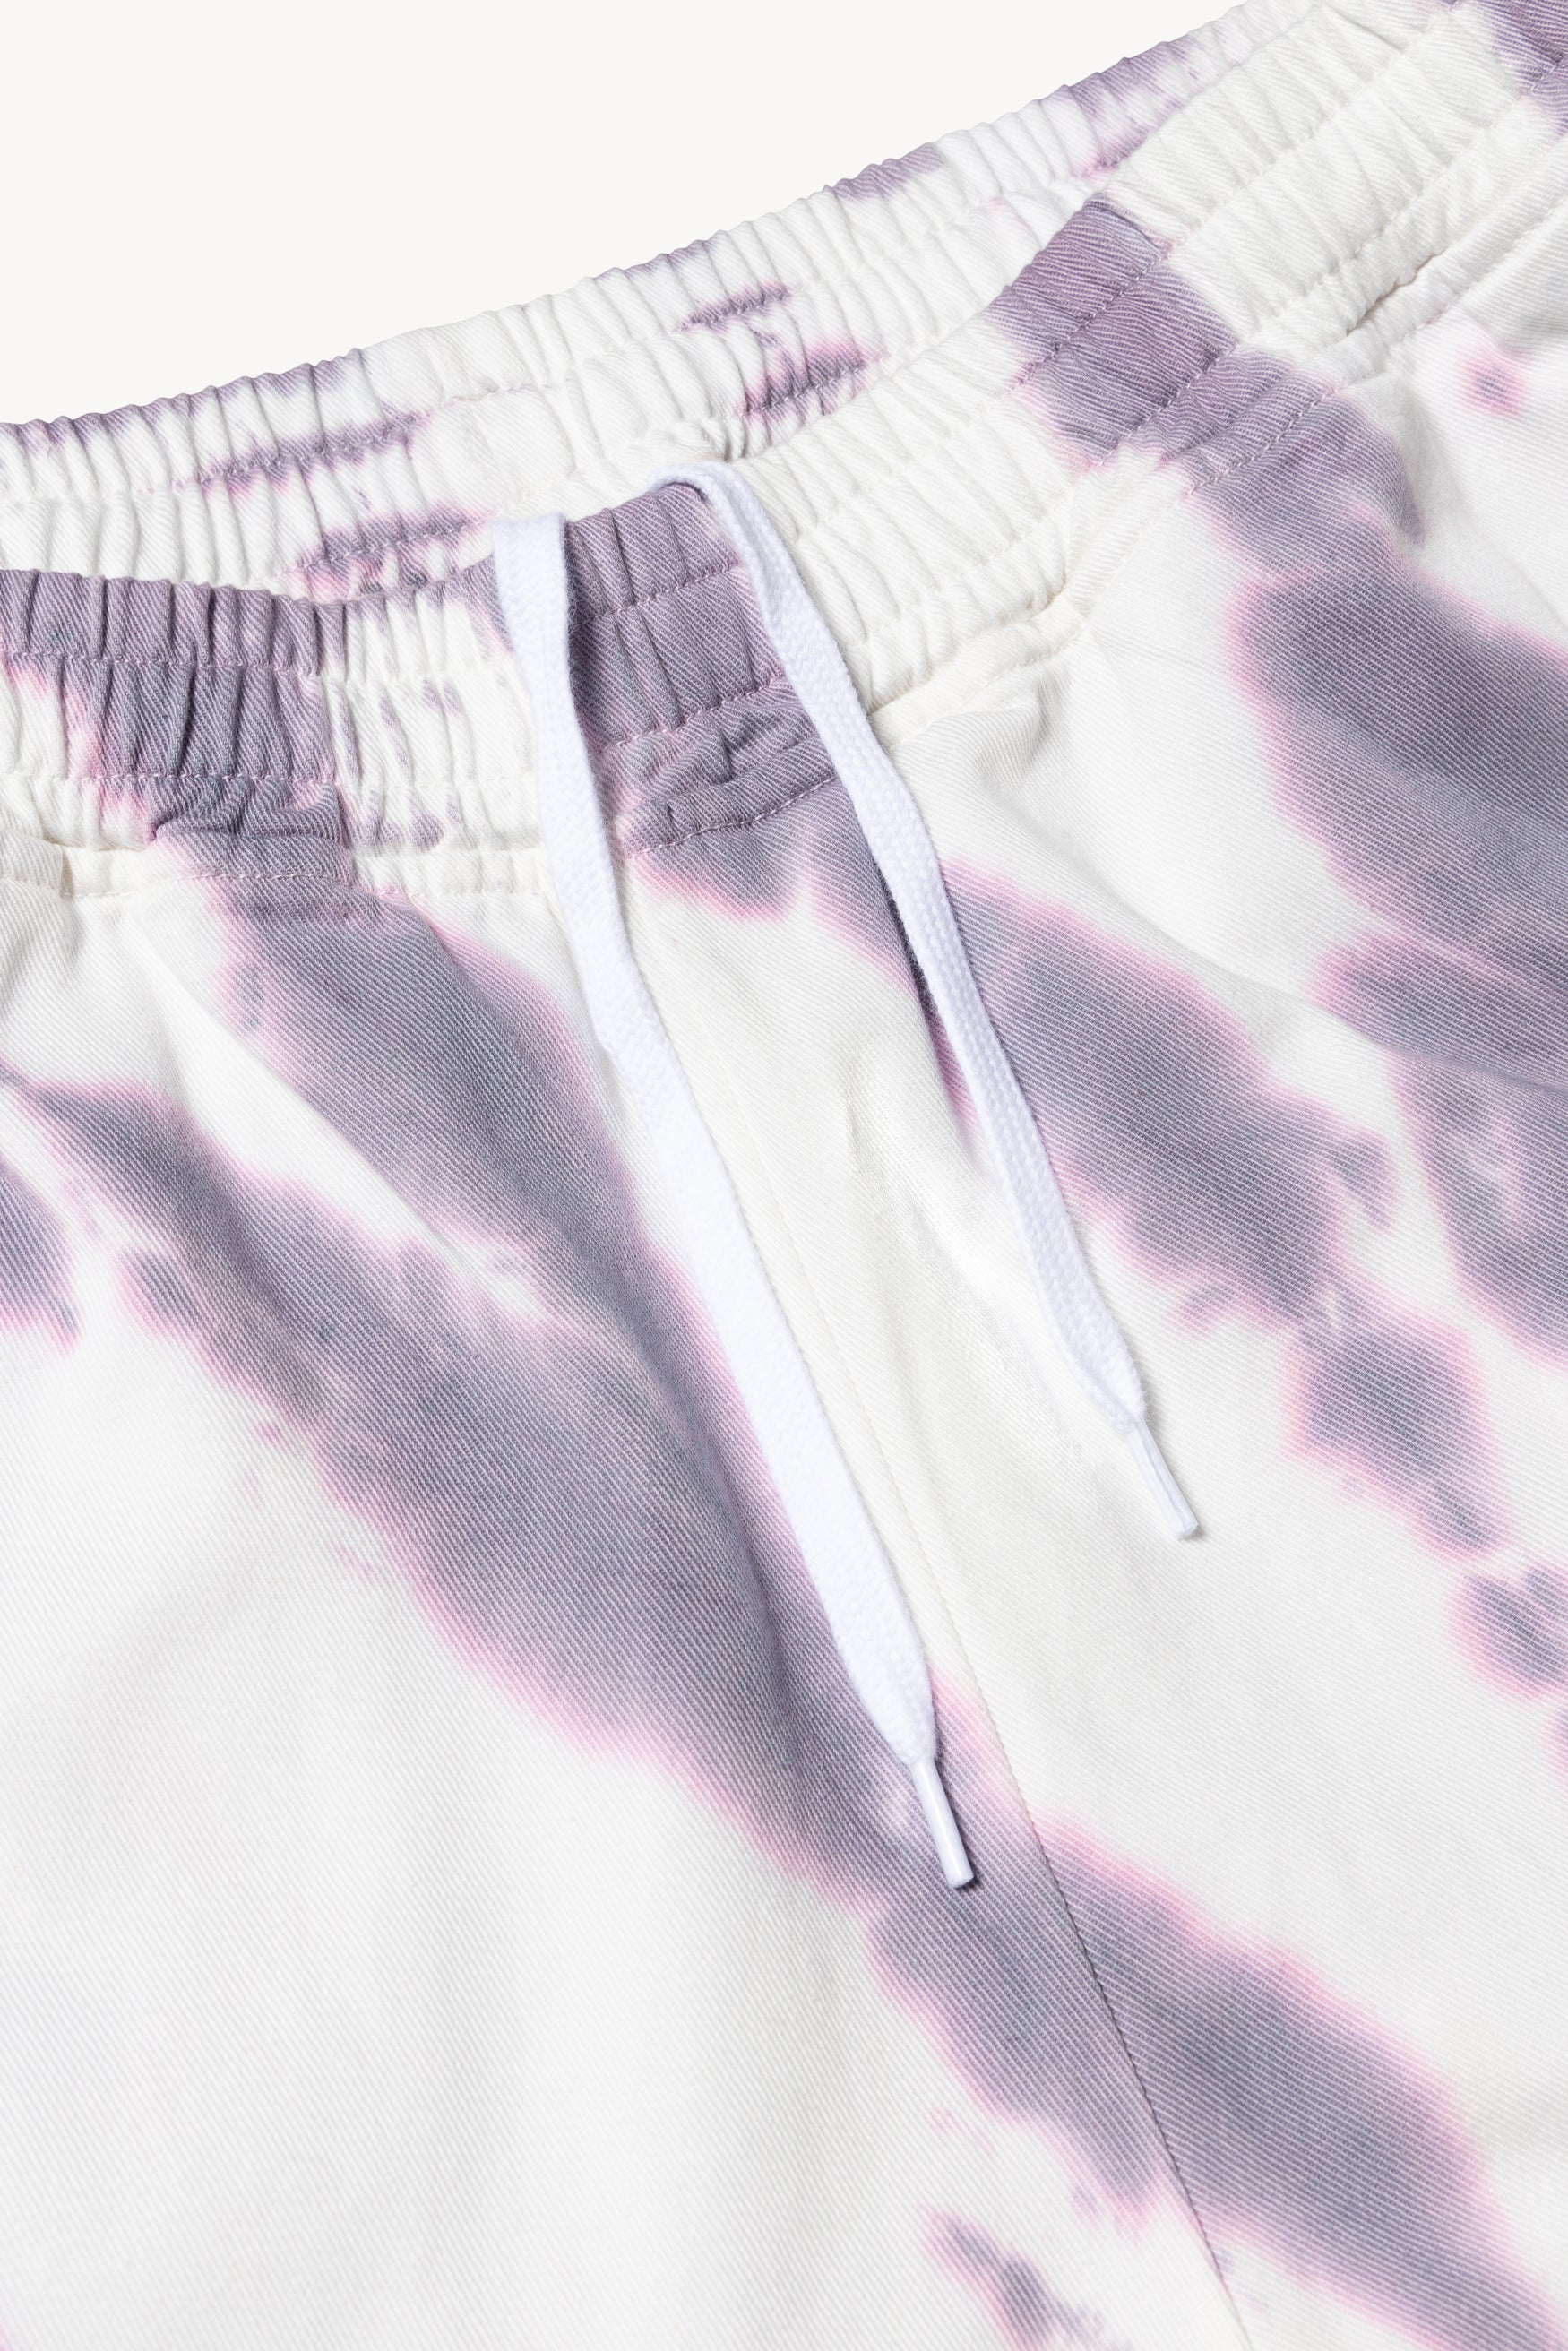 Load image into Gallery viewer, Aries x Umbro Tie Dye Pro 64 Pant